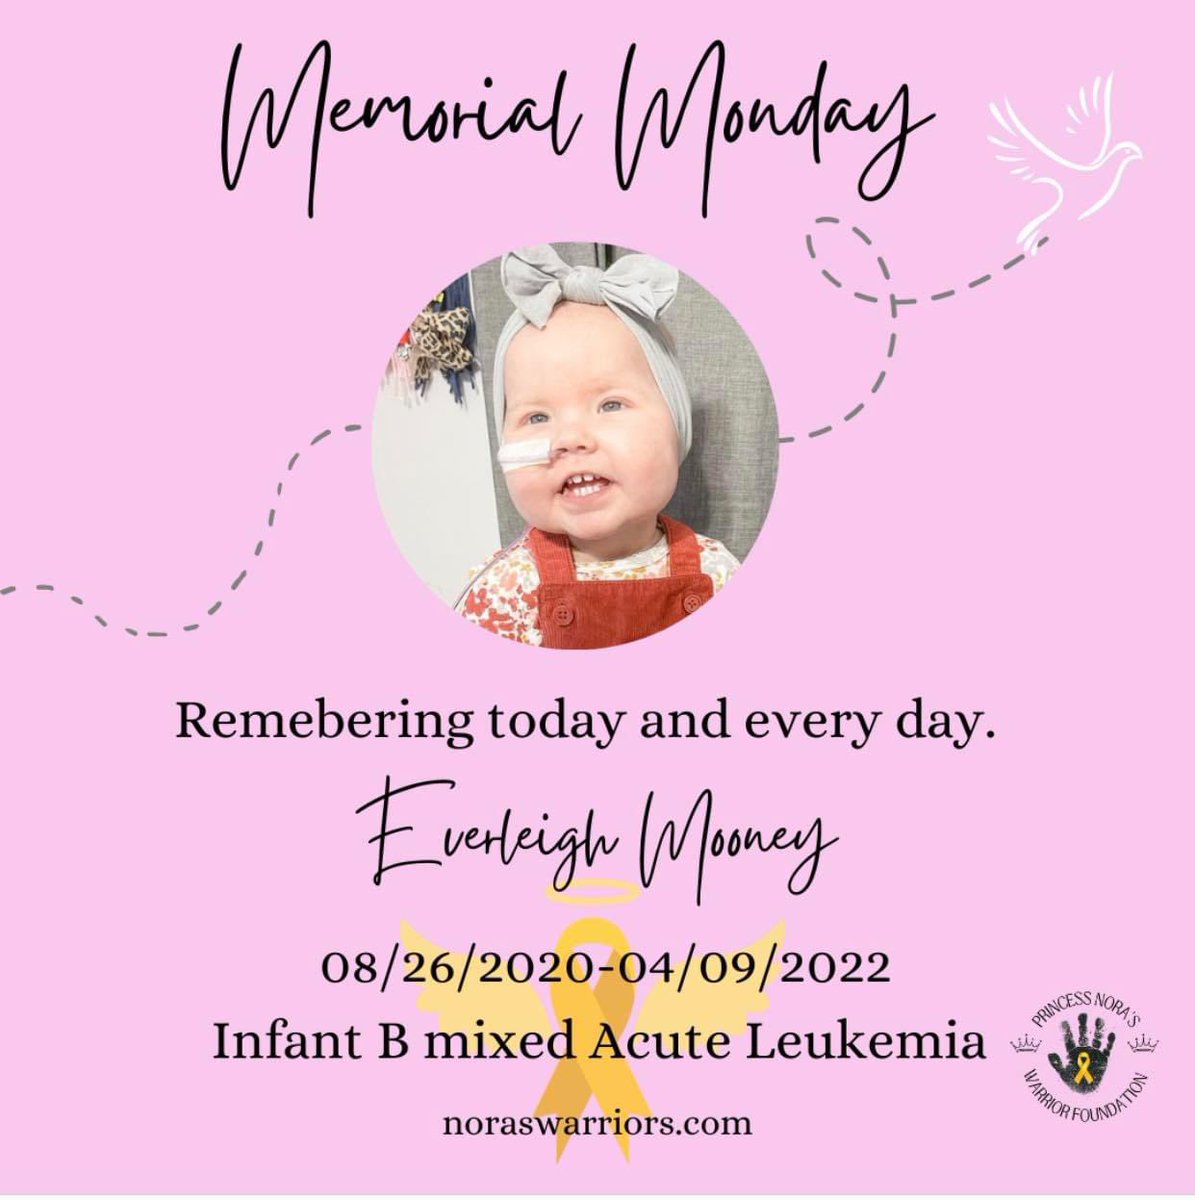 In memory of Everleigh Mooney 👼🎗️

8/26/20 - 4/9/22

Everleigh was diagnosed at 6 months old with infant B mixed Phenotype Acute Leukemia..

Check out our FB page for full post
#morethan8 #pnwf #curechildhoodcancer #leukemiawarrior #memorialmonday